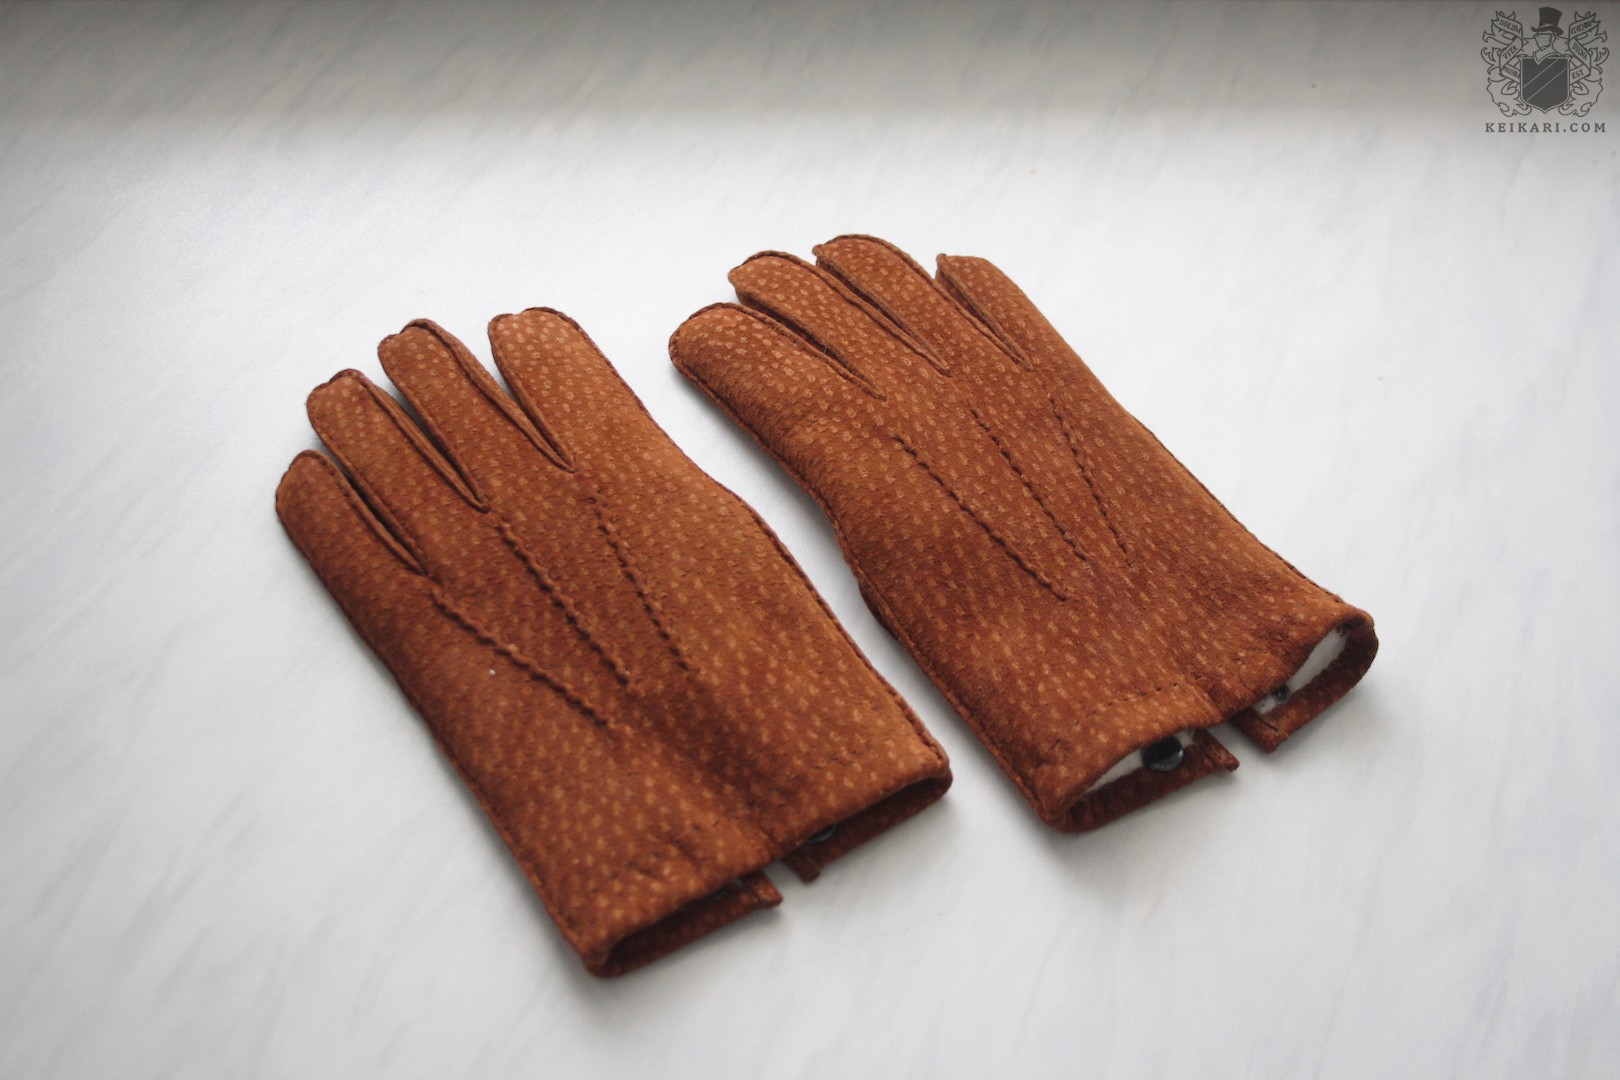 Made_to_measure_gloves_from_Jeeves_Store_at_Keikari_dot_com